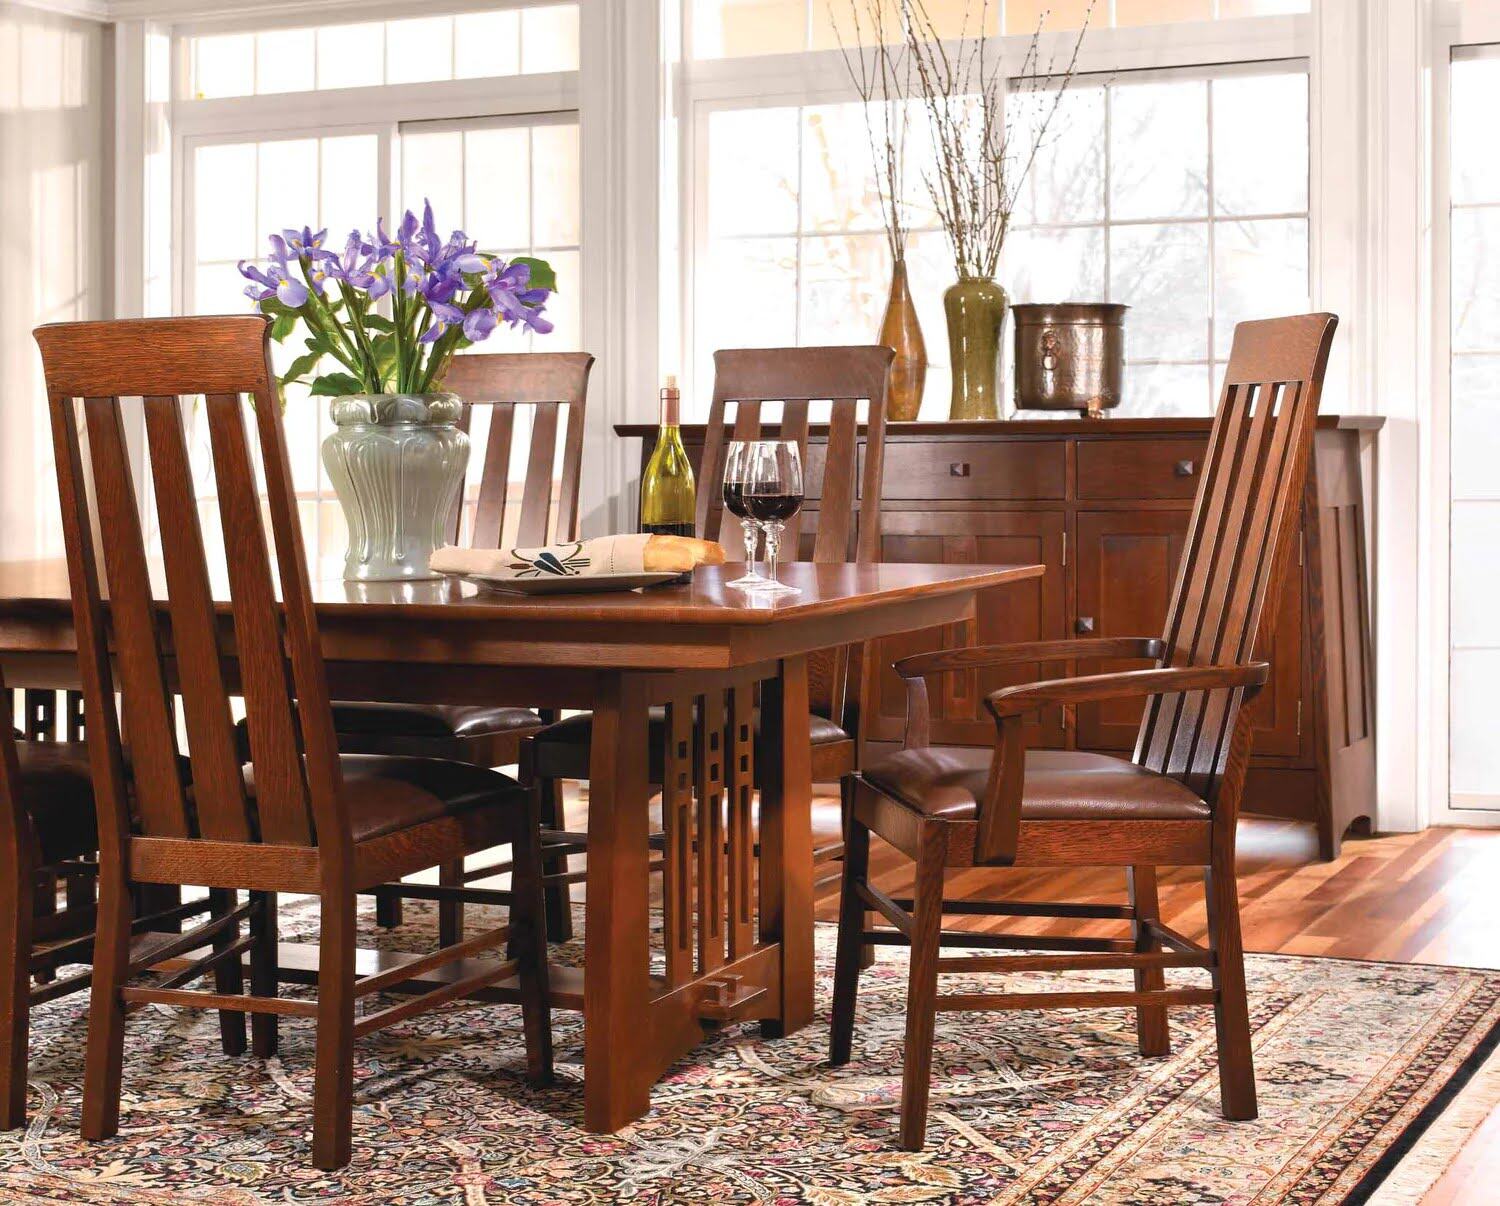 How To Build A Mission Style Dining Table